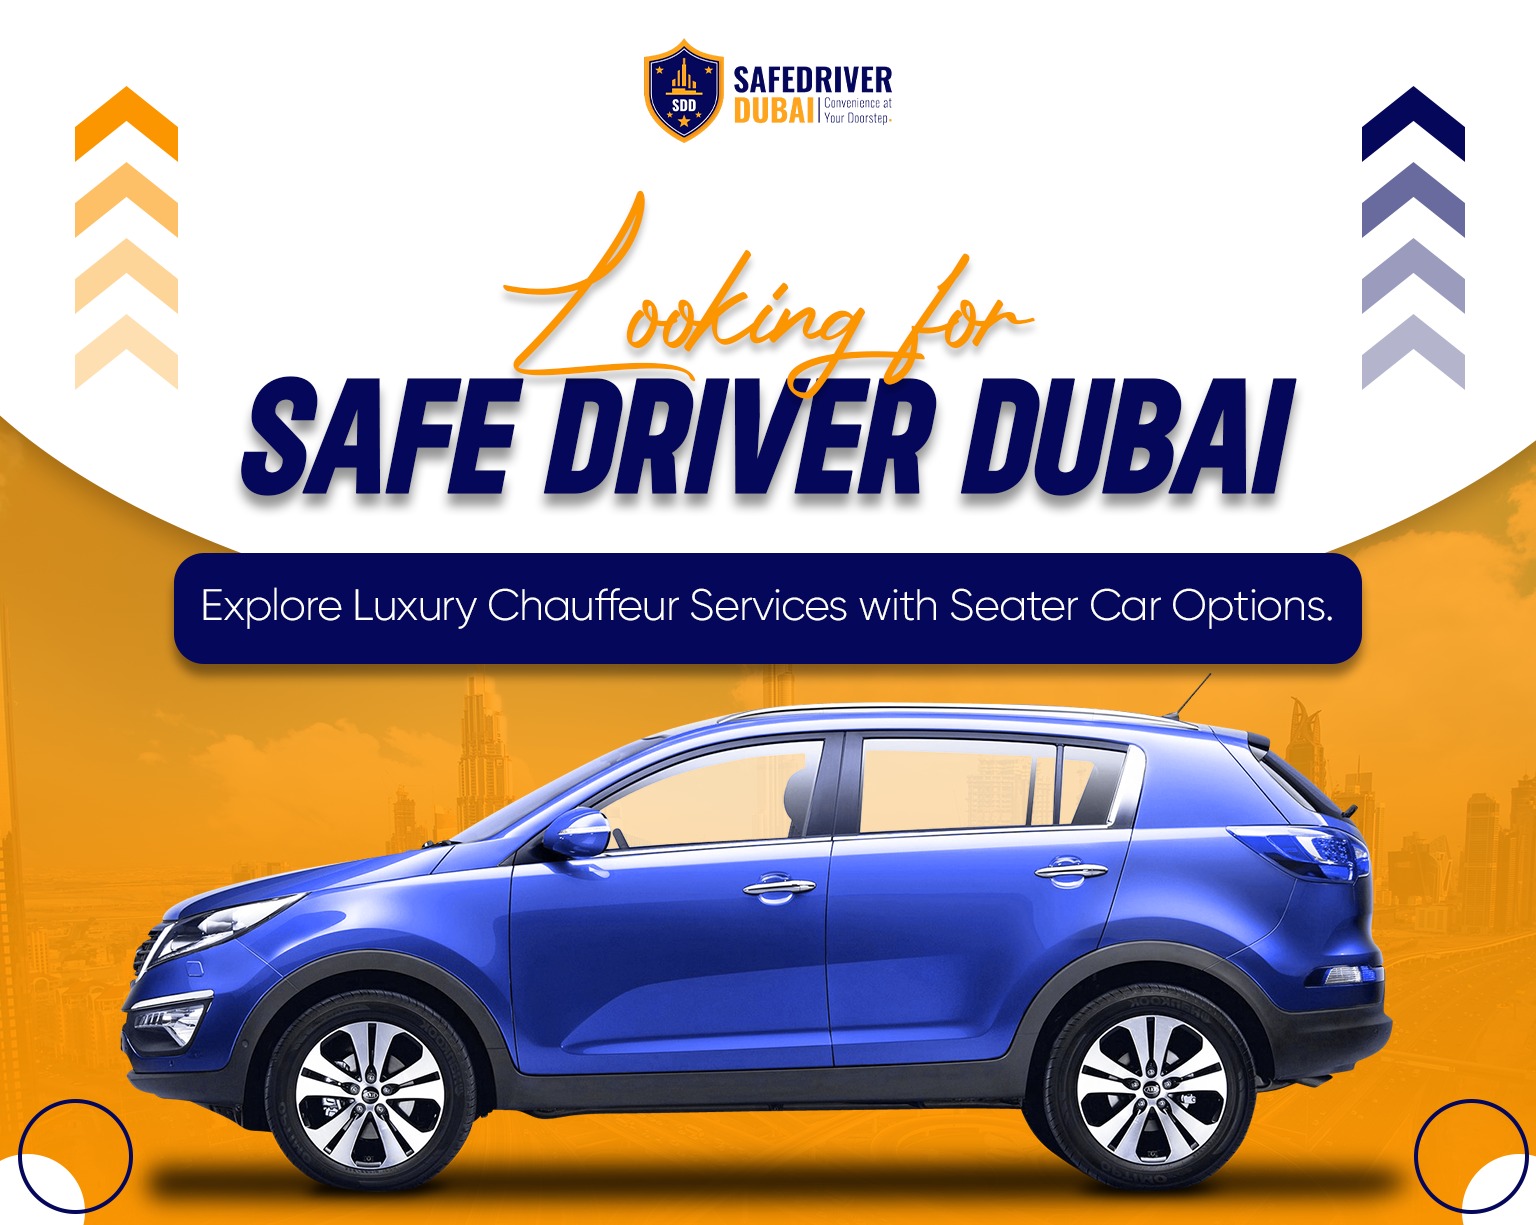 Looking-for-Safe-Driver-Dubai -Explore -Luxury- Chauffeur -Services- with-Seater-Car-Options